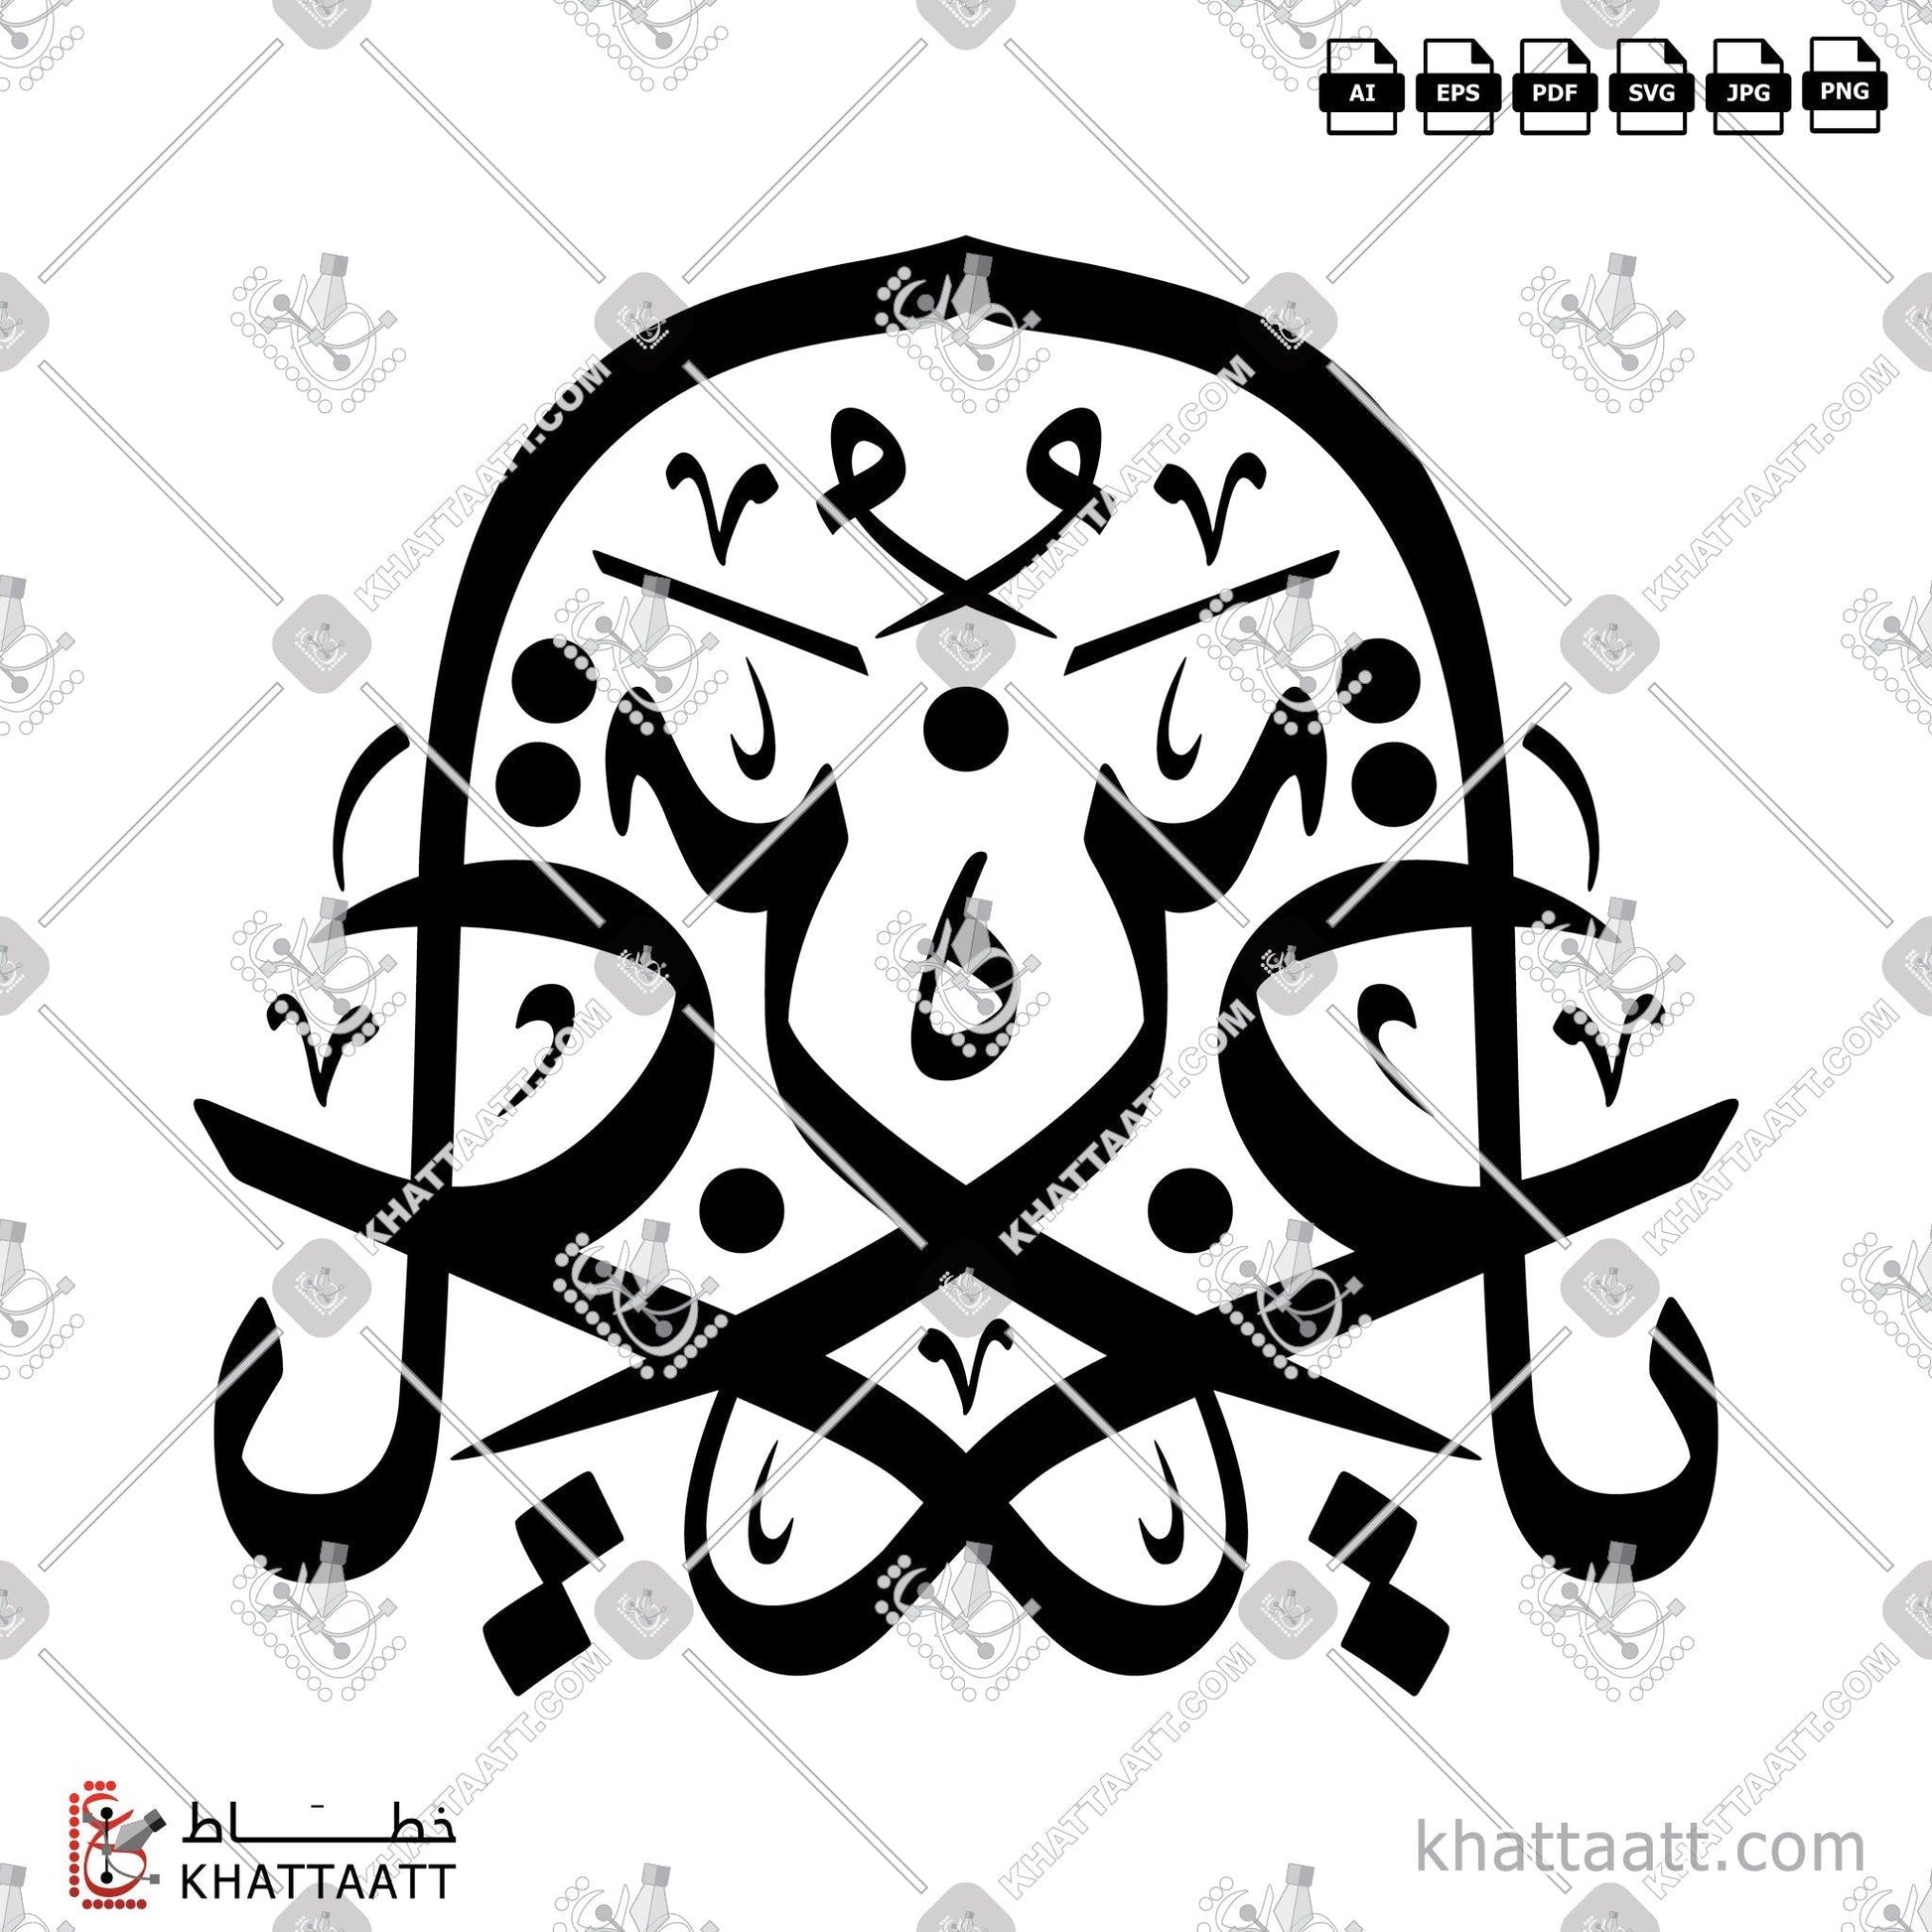 Download Arabic Calligraphy of Ya Aziz - يا عزيز in Thuluth - خط الثلث in vector and .png